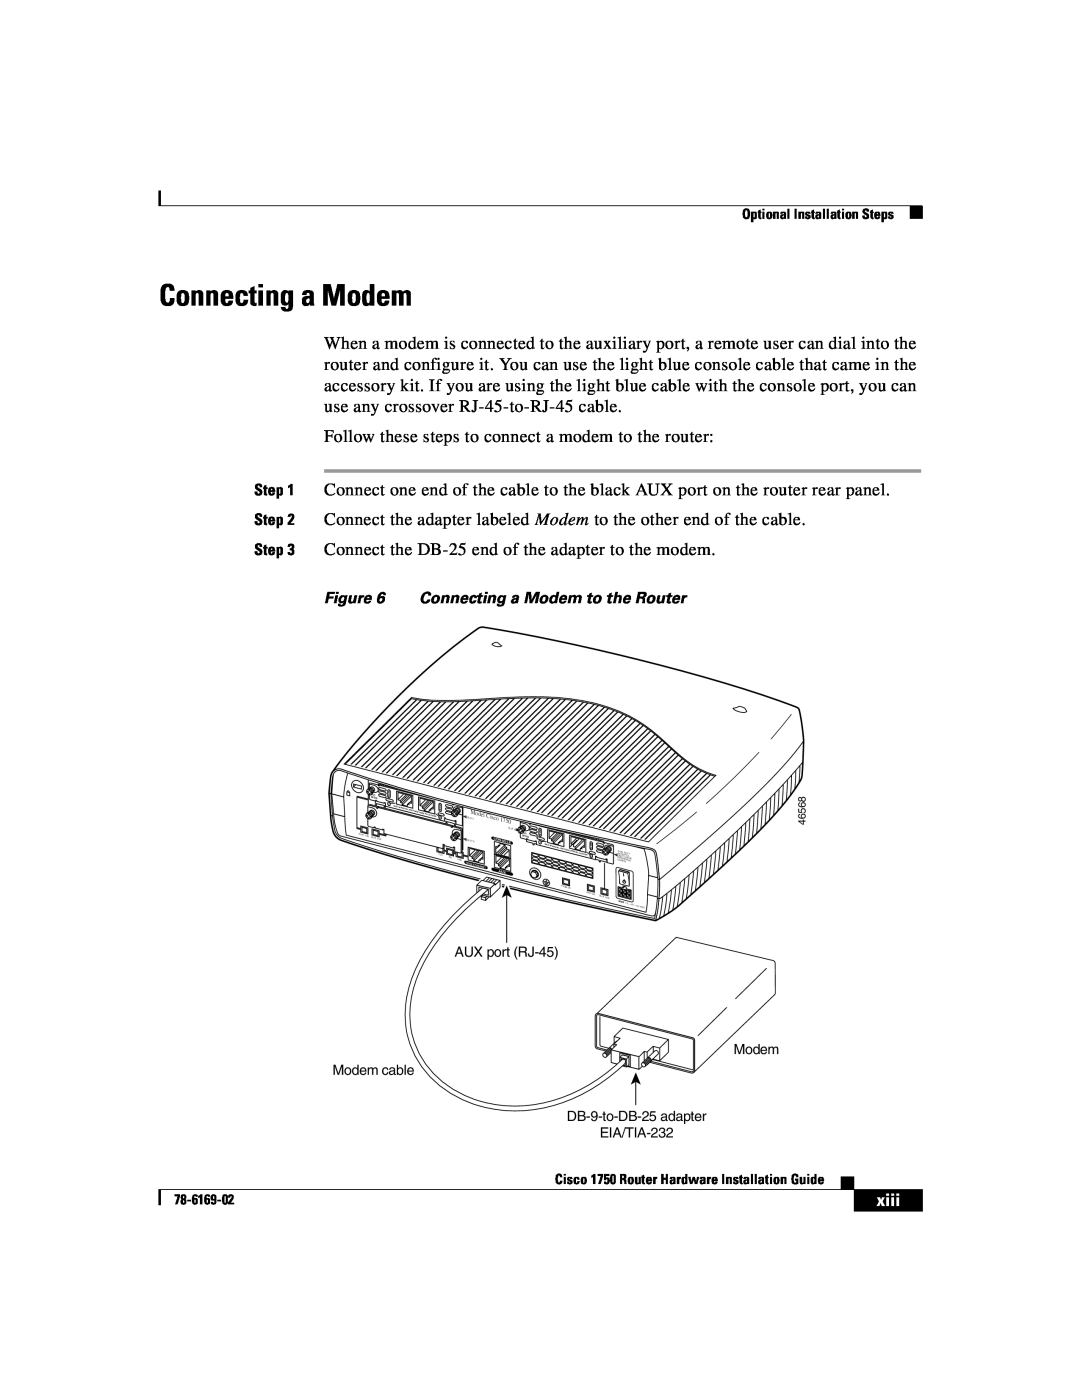 Cisco Systems CISCO1750 manual Connecting a Modem, xiii 